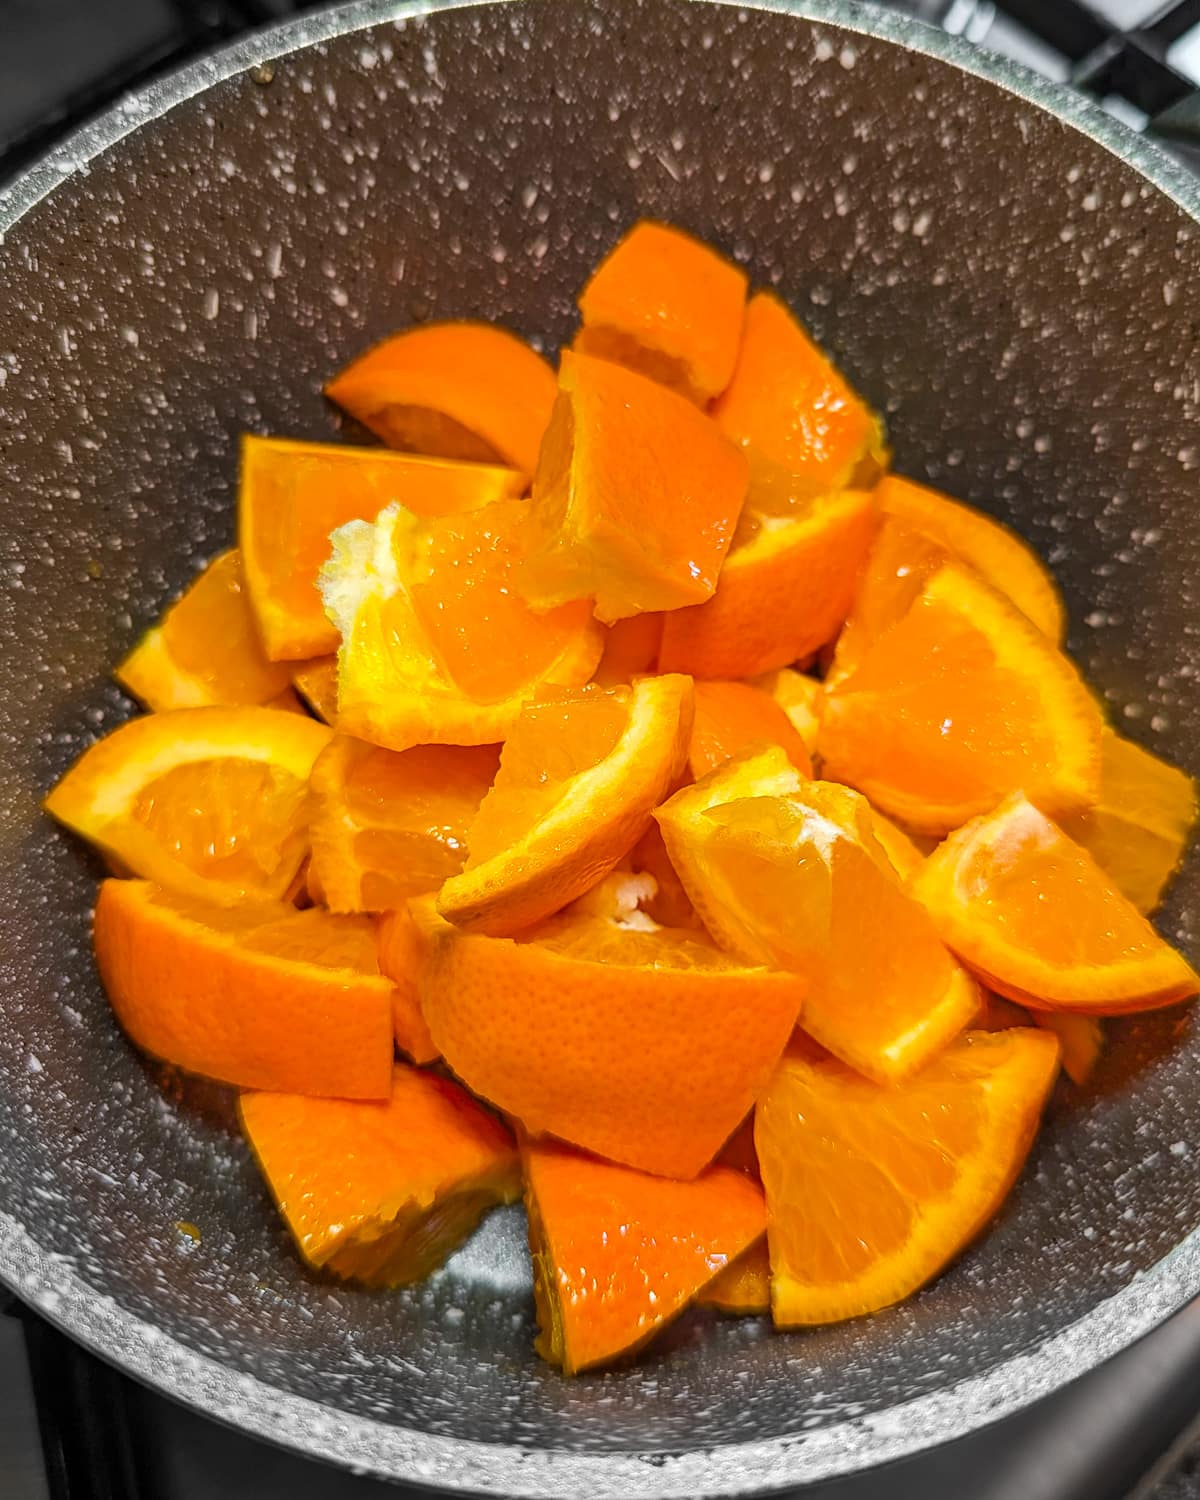 Mandarin pieces in a pan on the stove.